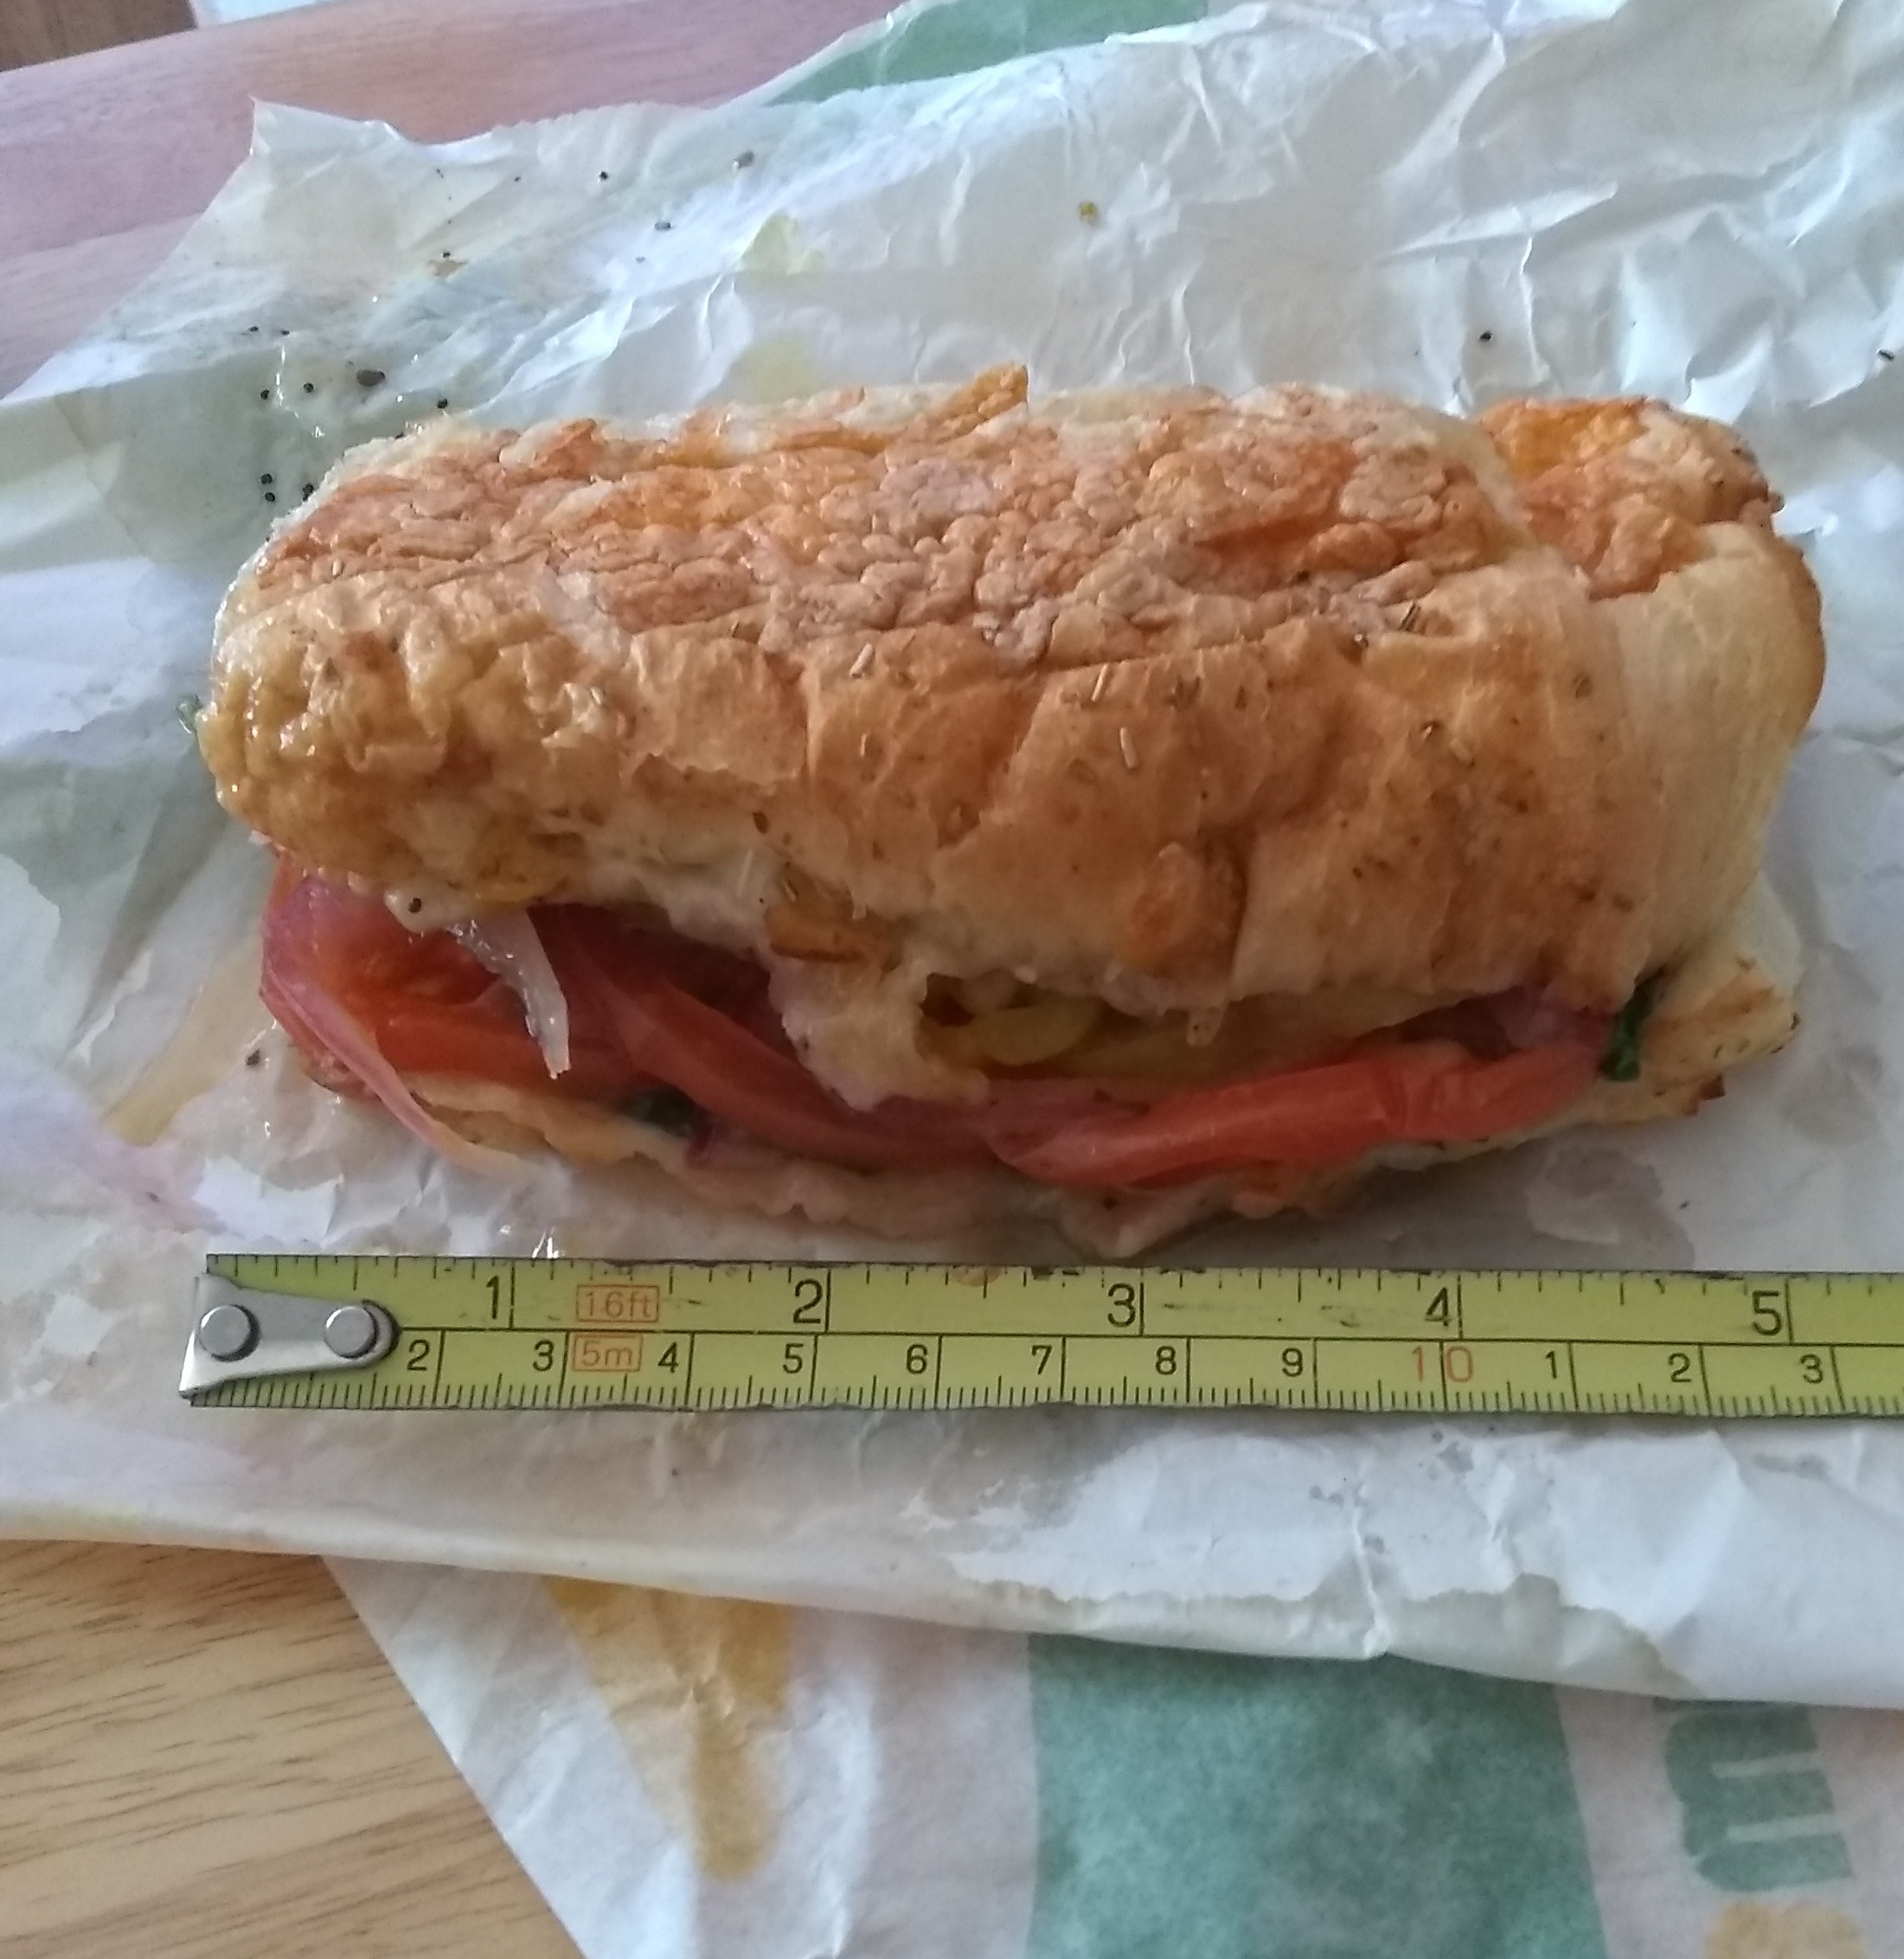 Subway complaint Five not six inches!